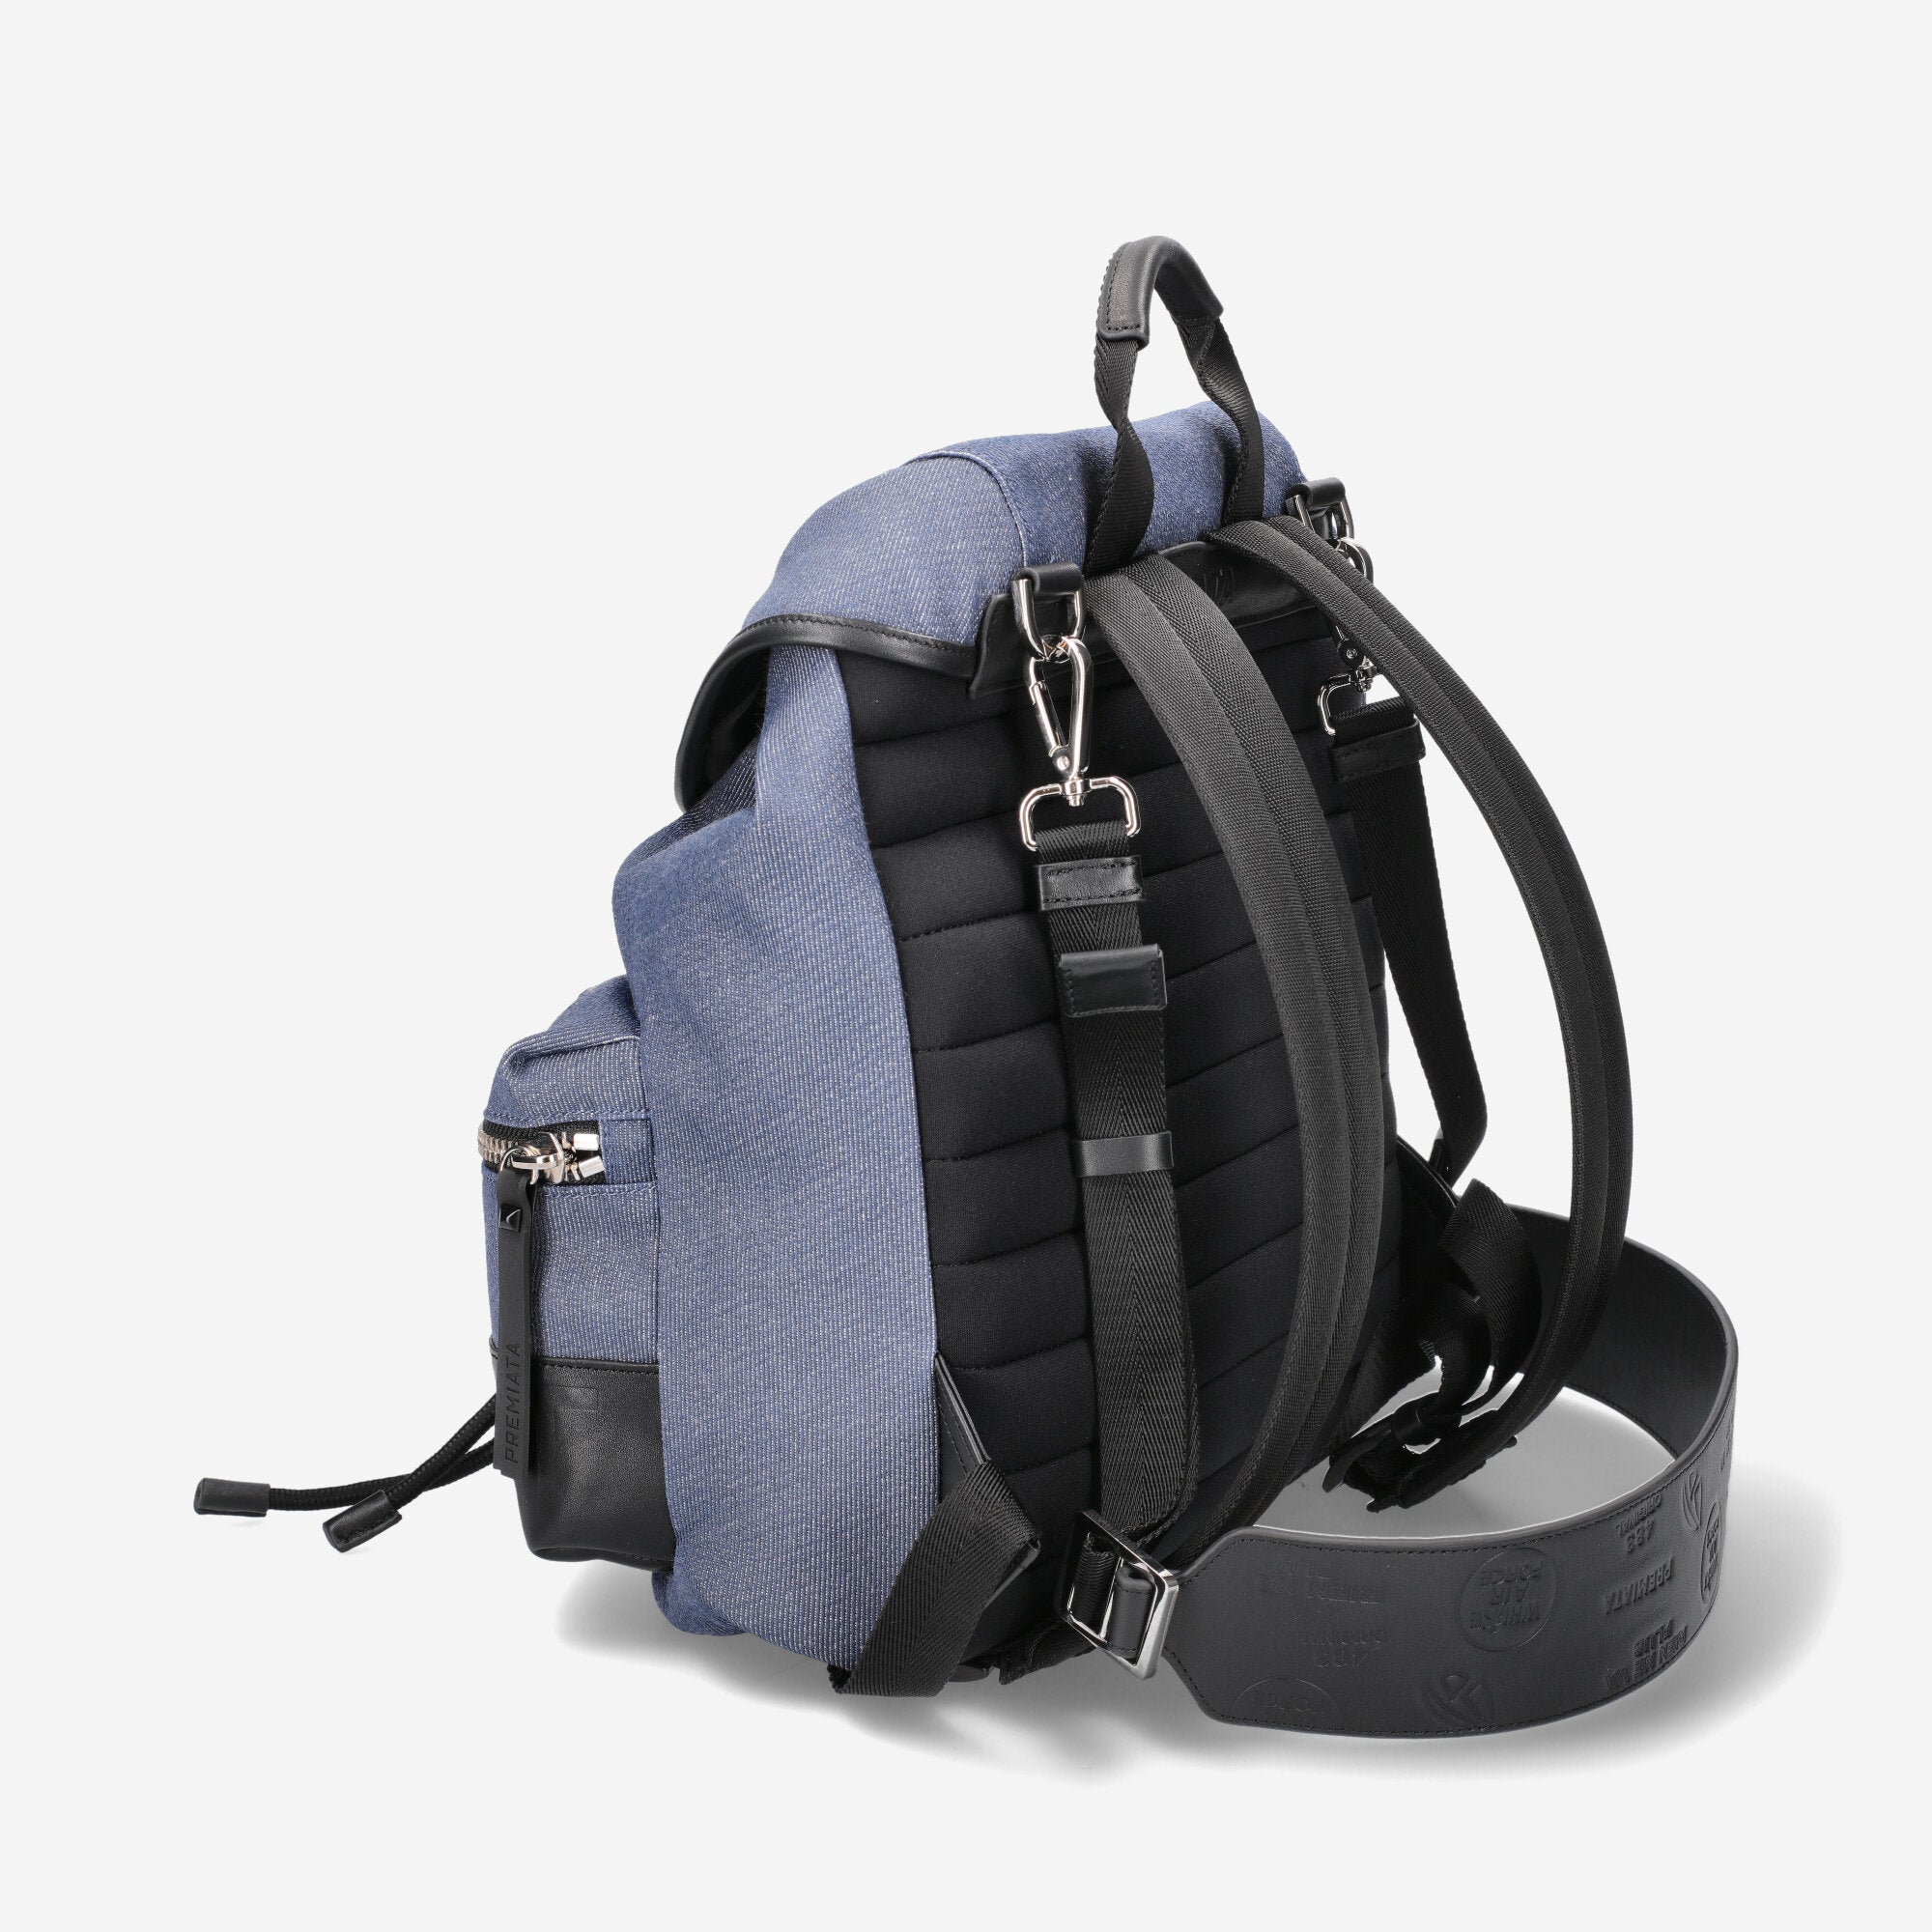 Lyn Premiata's Navy Nylon and Leather Lined Backpack